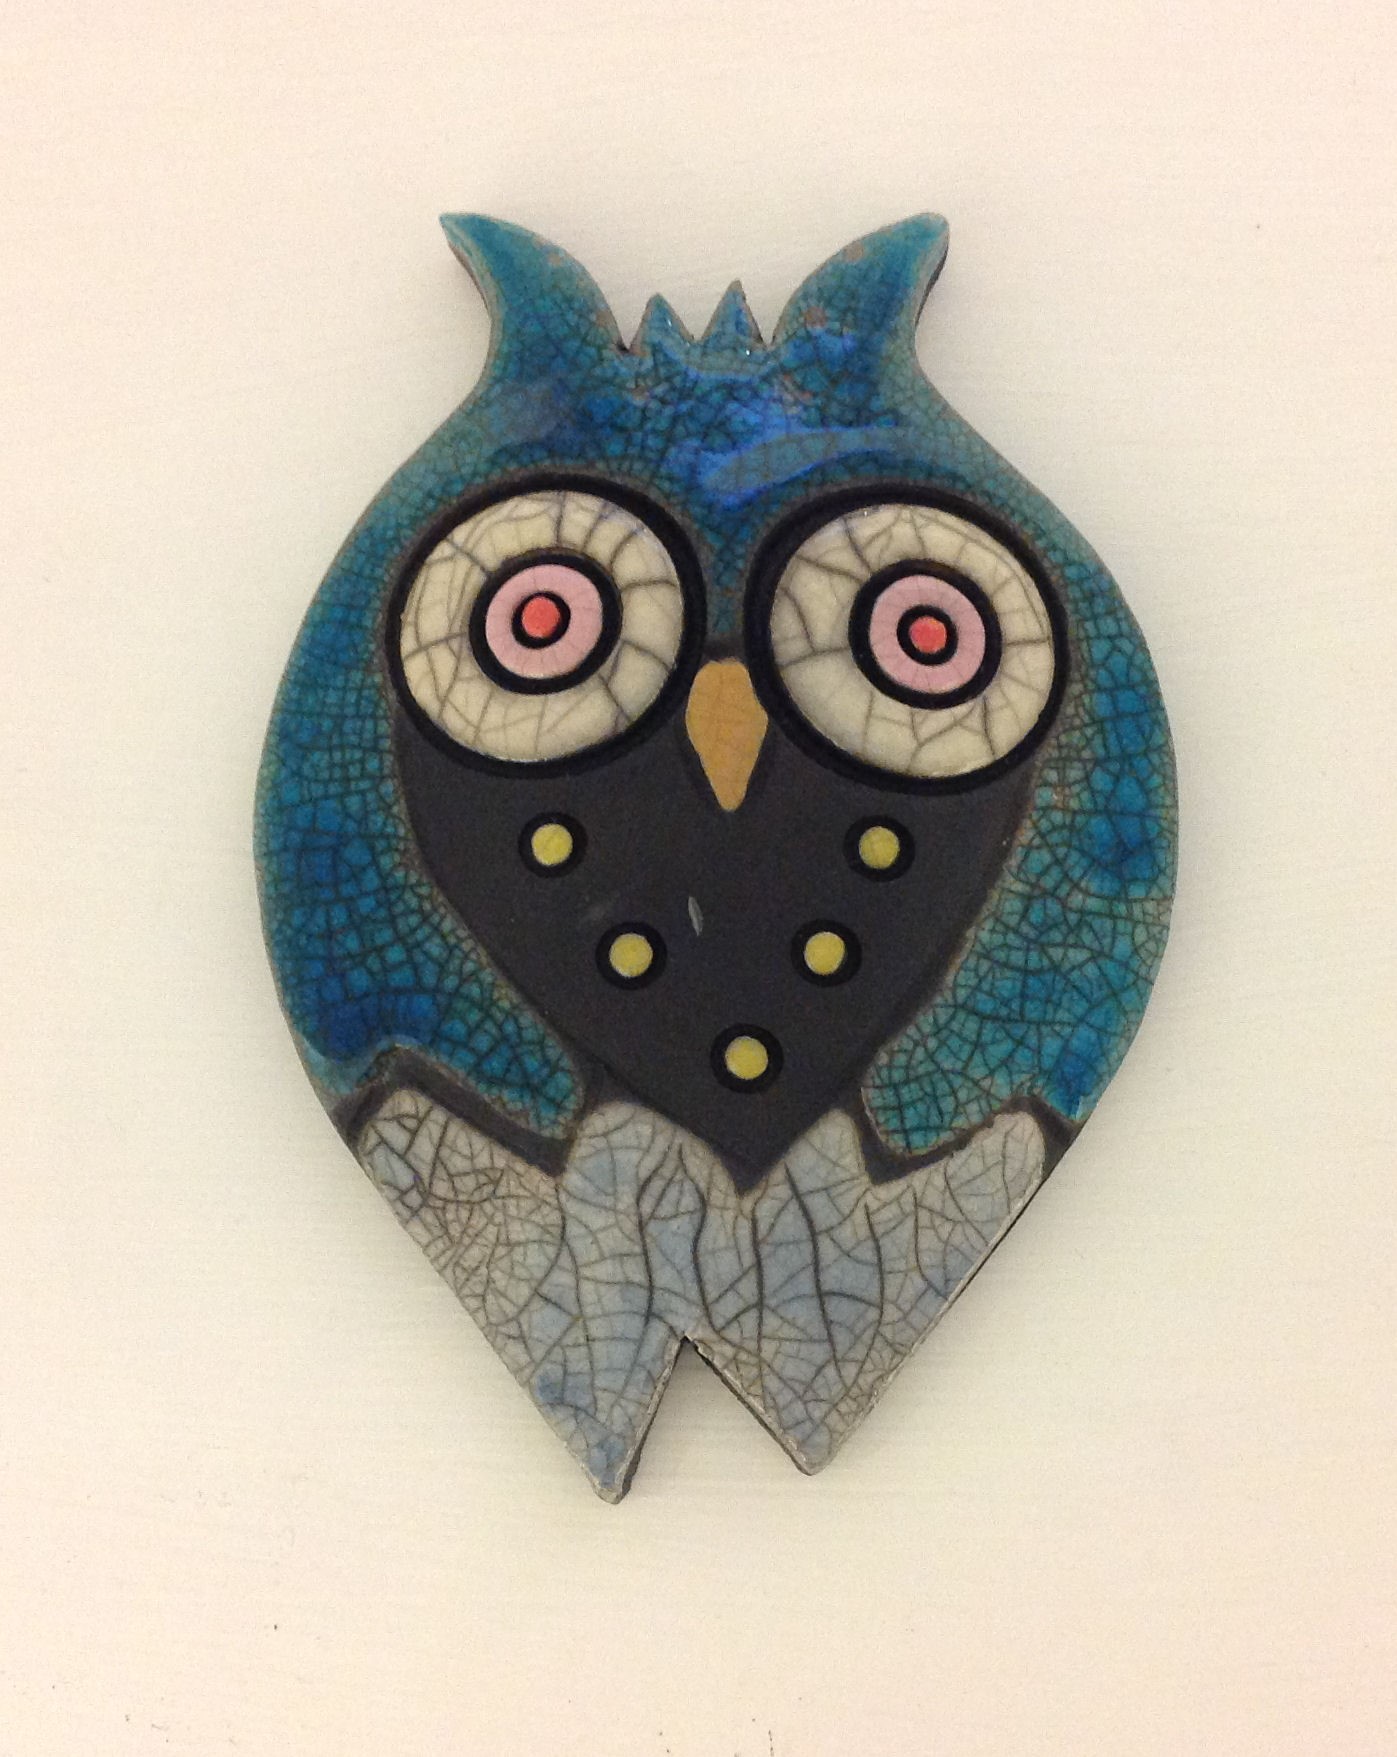 'Owl Small IV' by artist Julian Smith